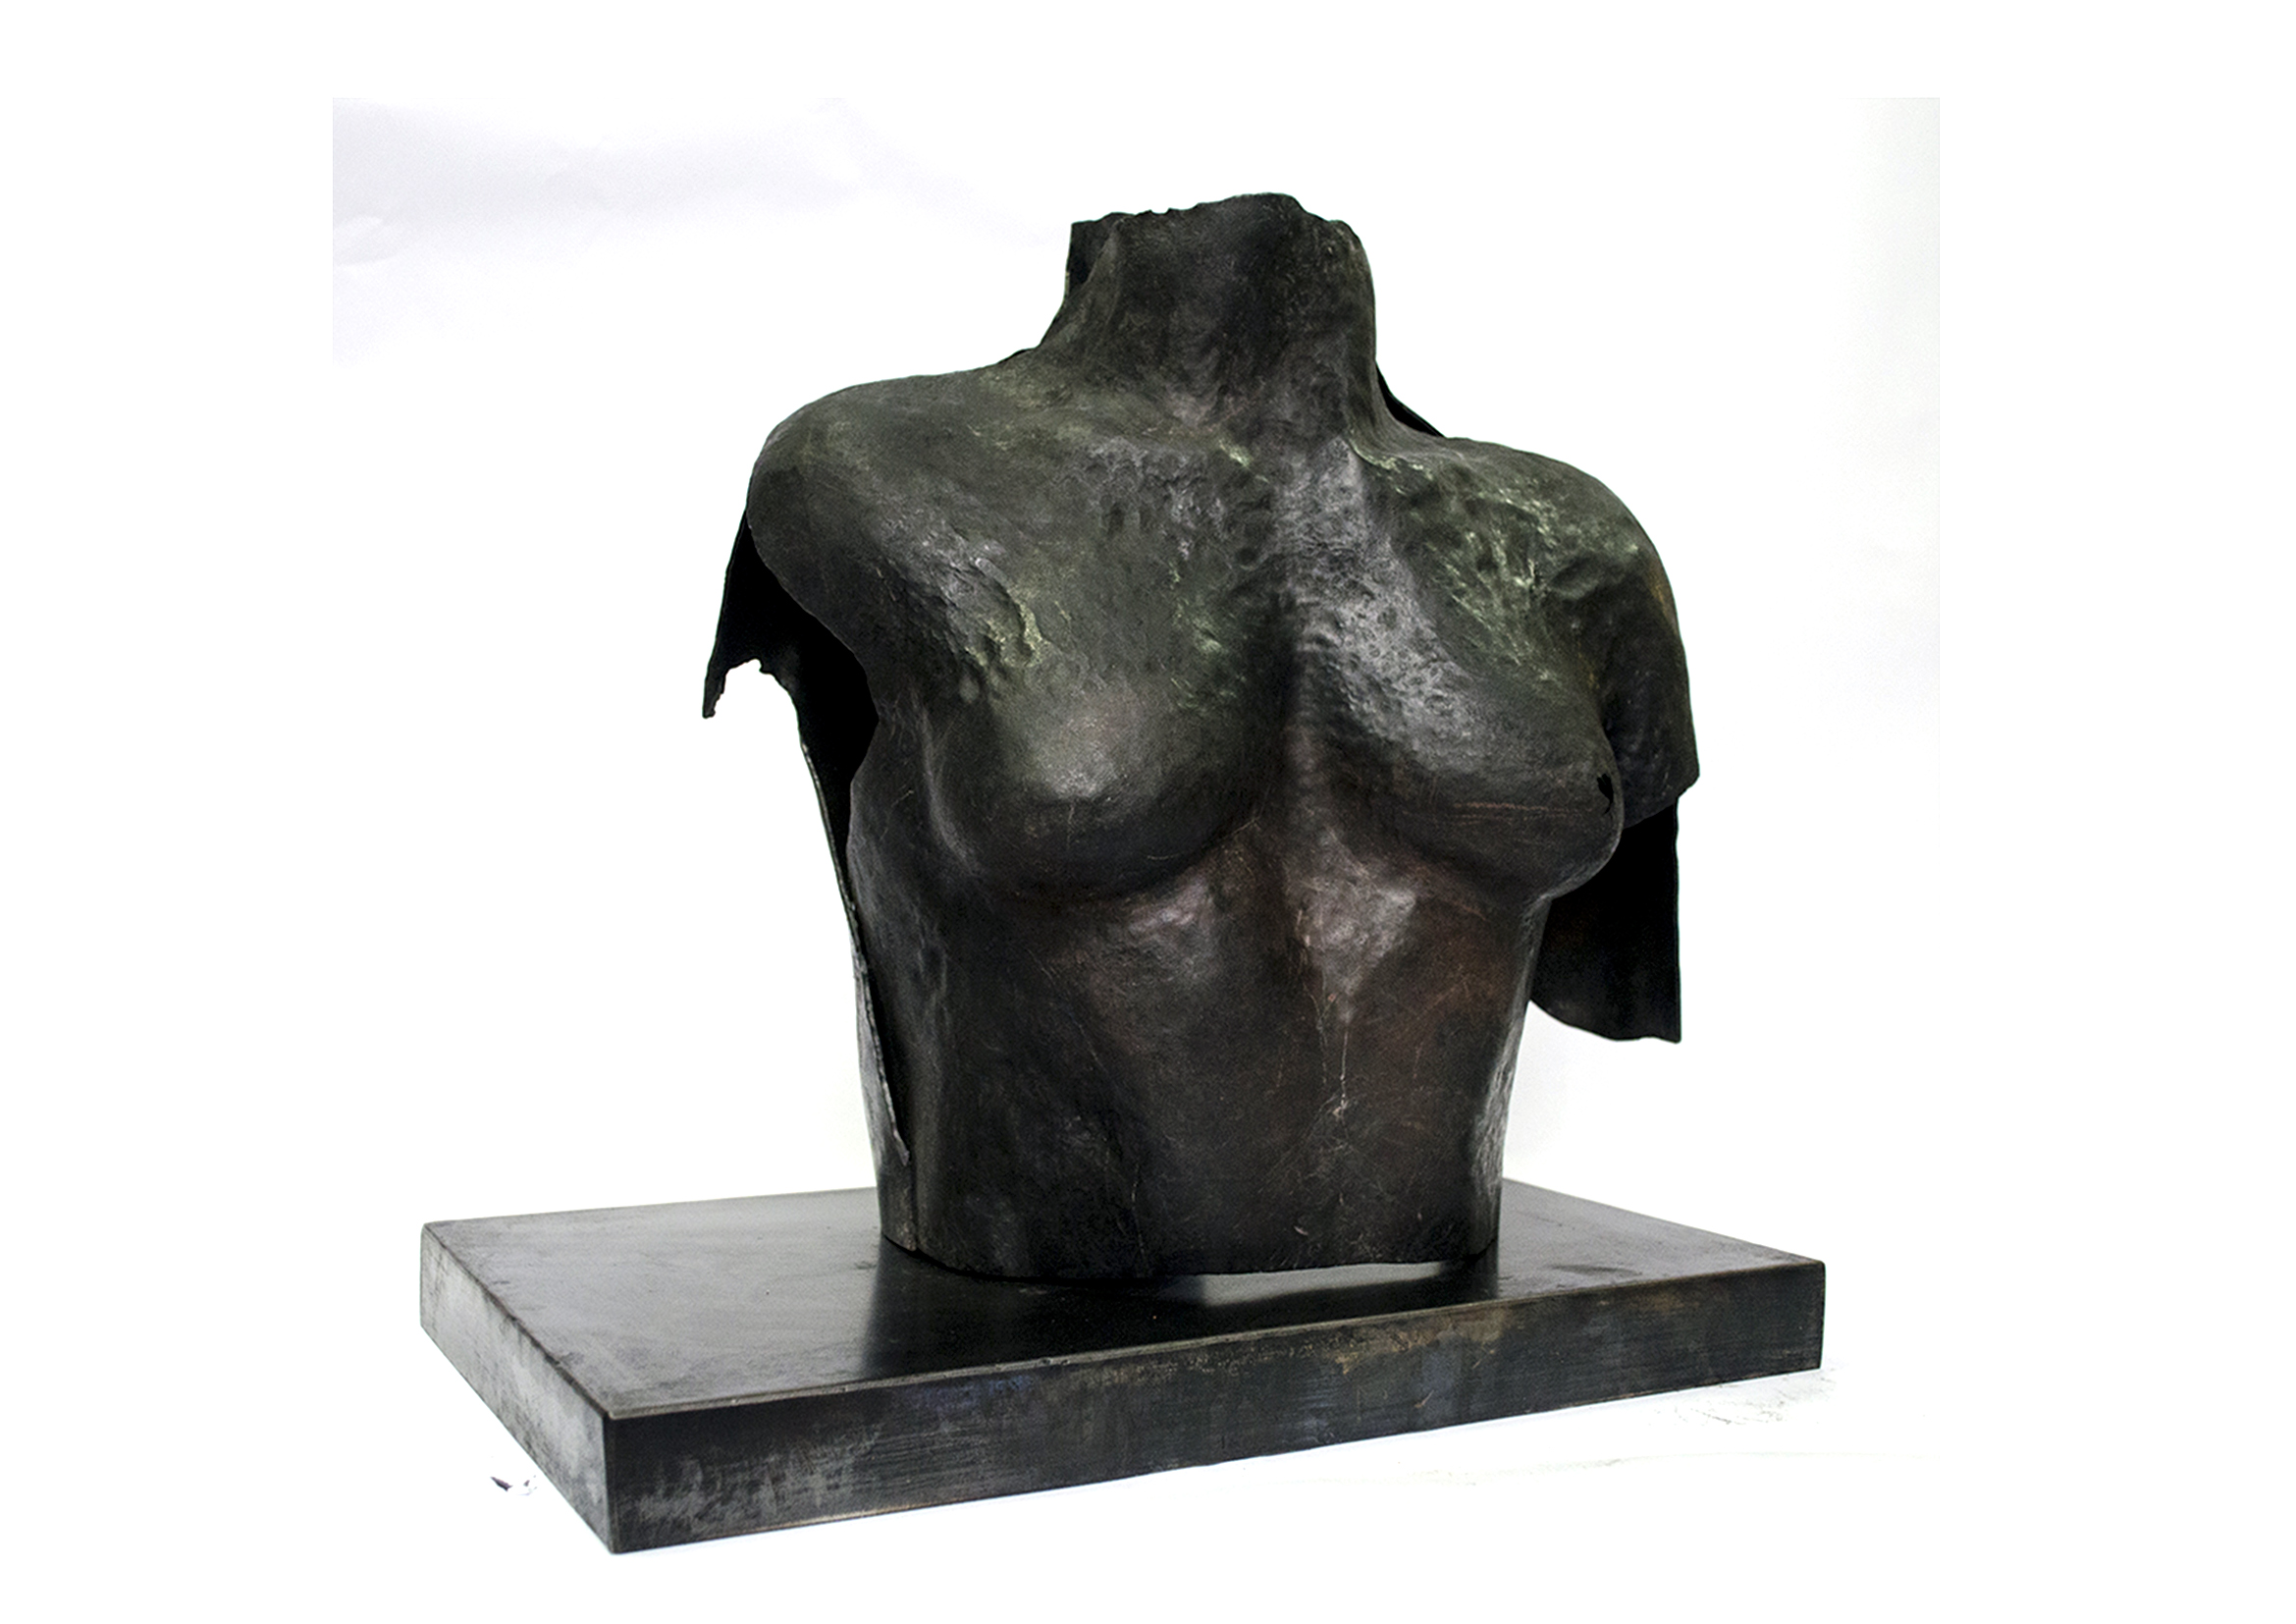  Bodytype02  Forged and welded Iron  50x40x30 cm 